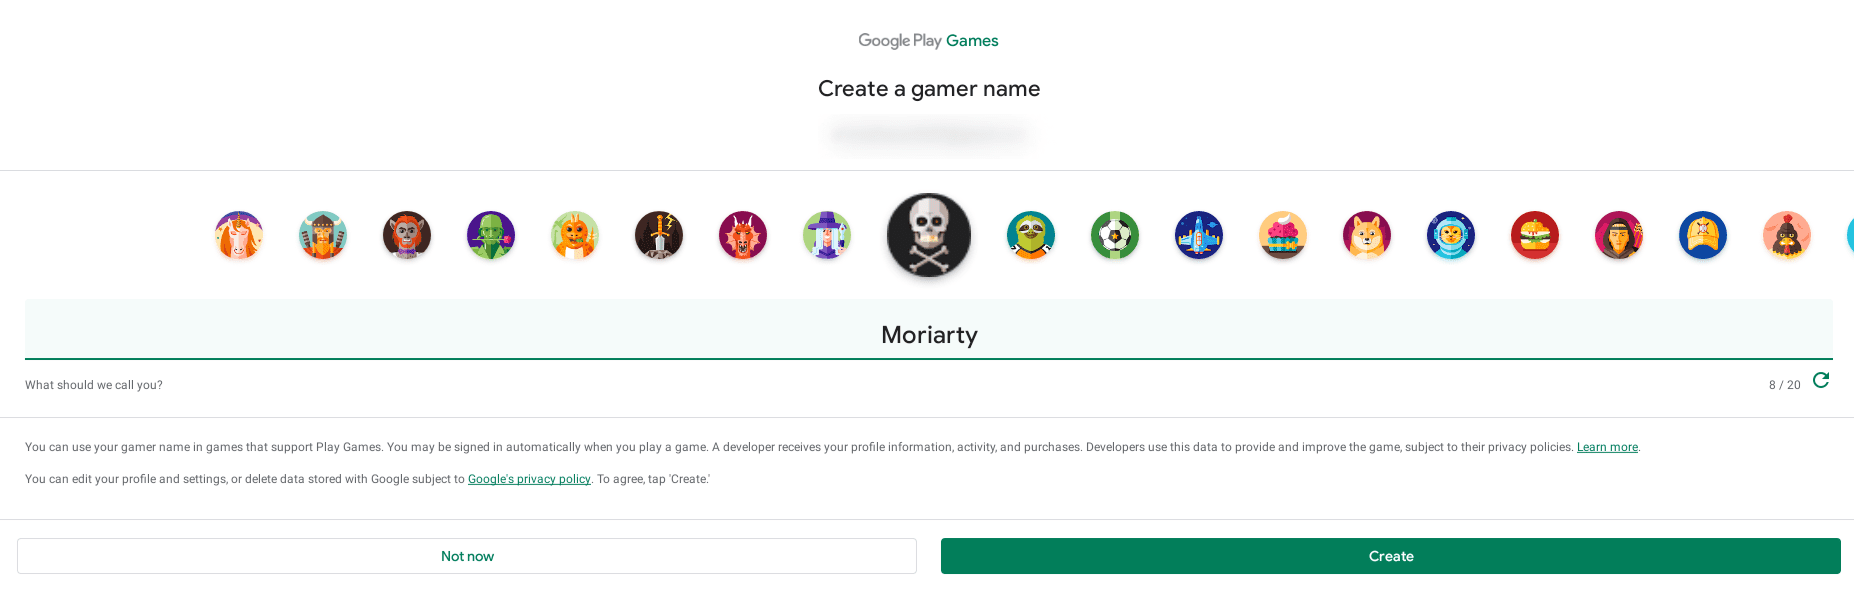 Registering for Google Play Games